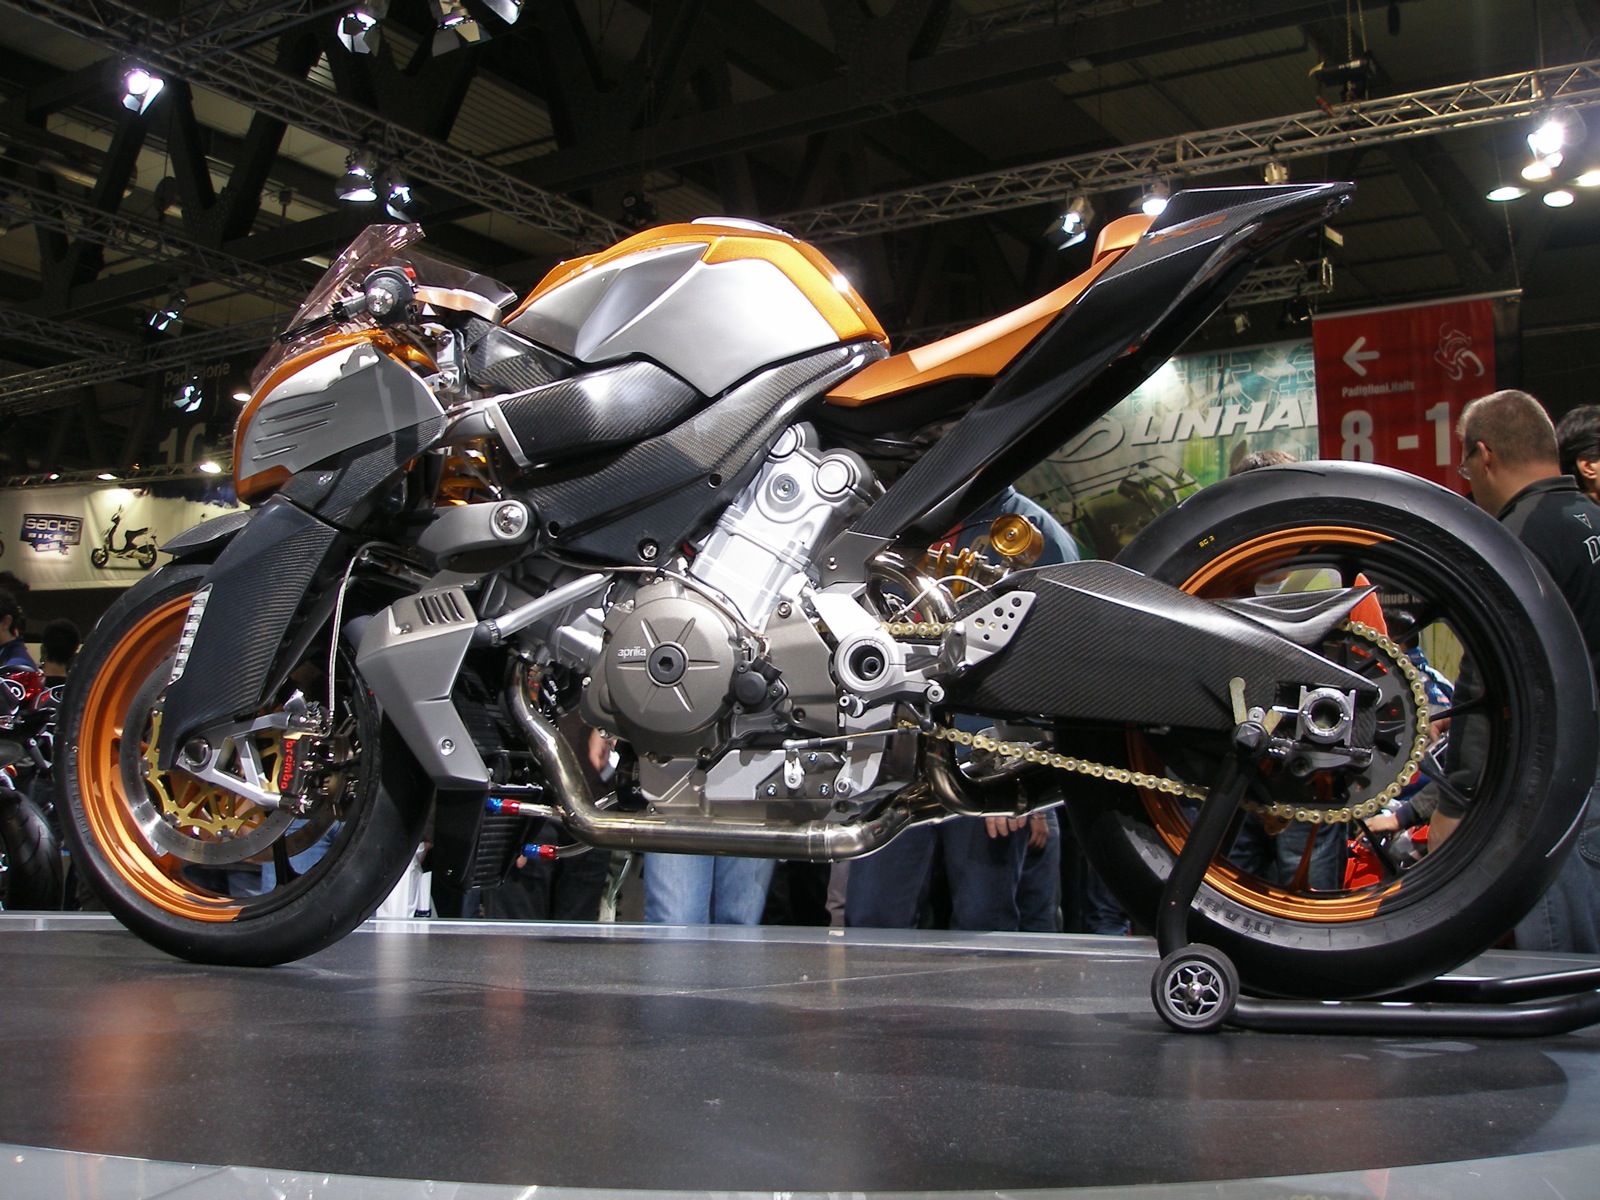 a large motorcycle on display at a motor show